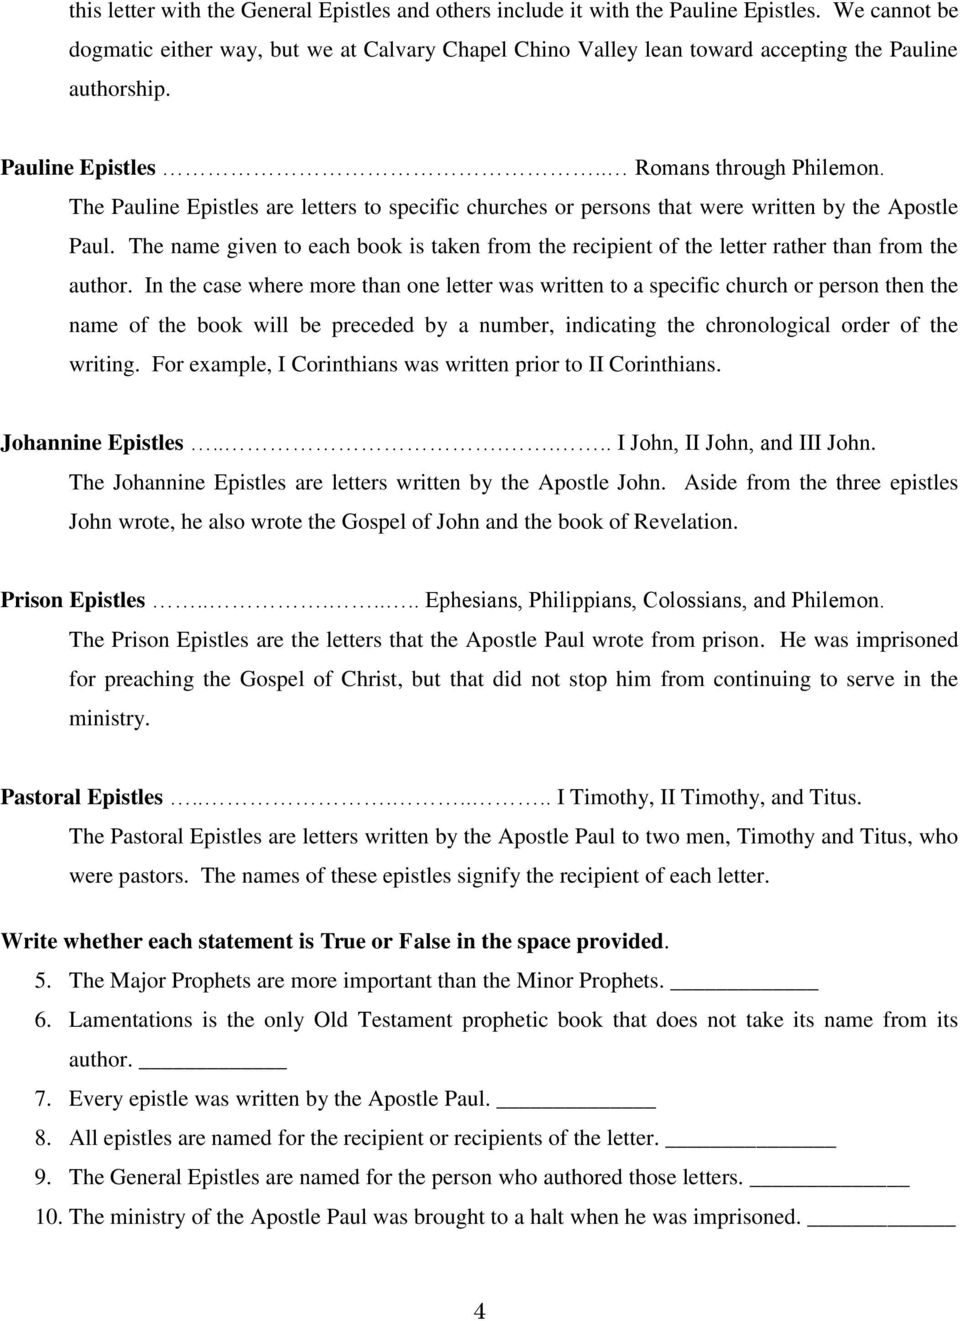 The Pauline Epistles are letters to specific churches or persons that were written by the Apostle Paul.